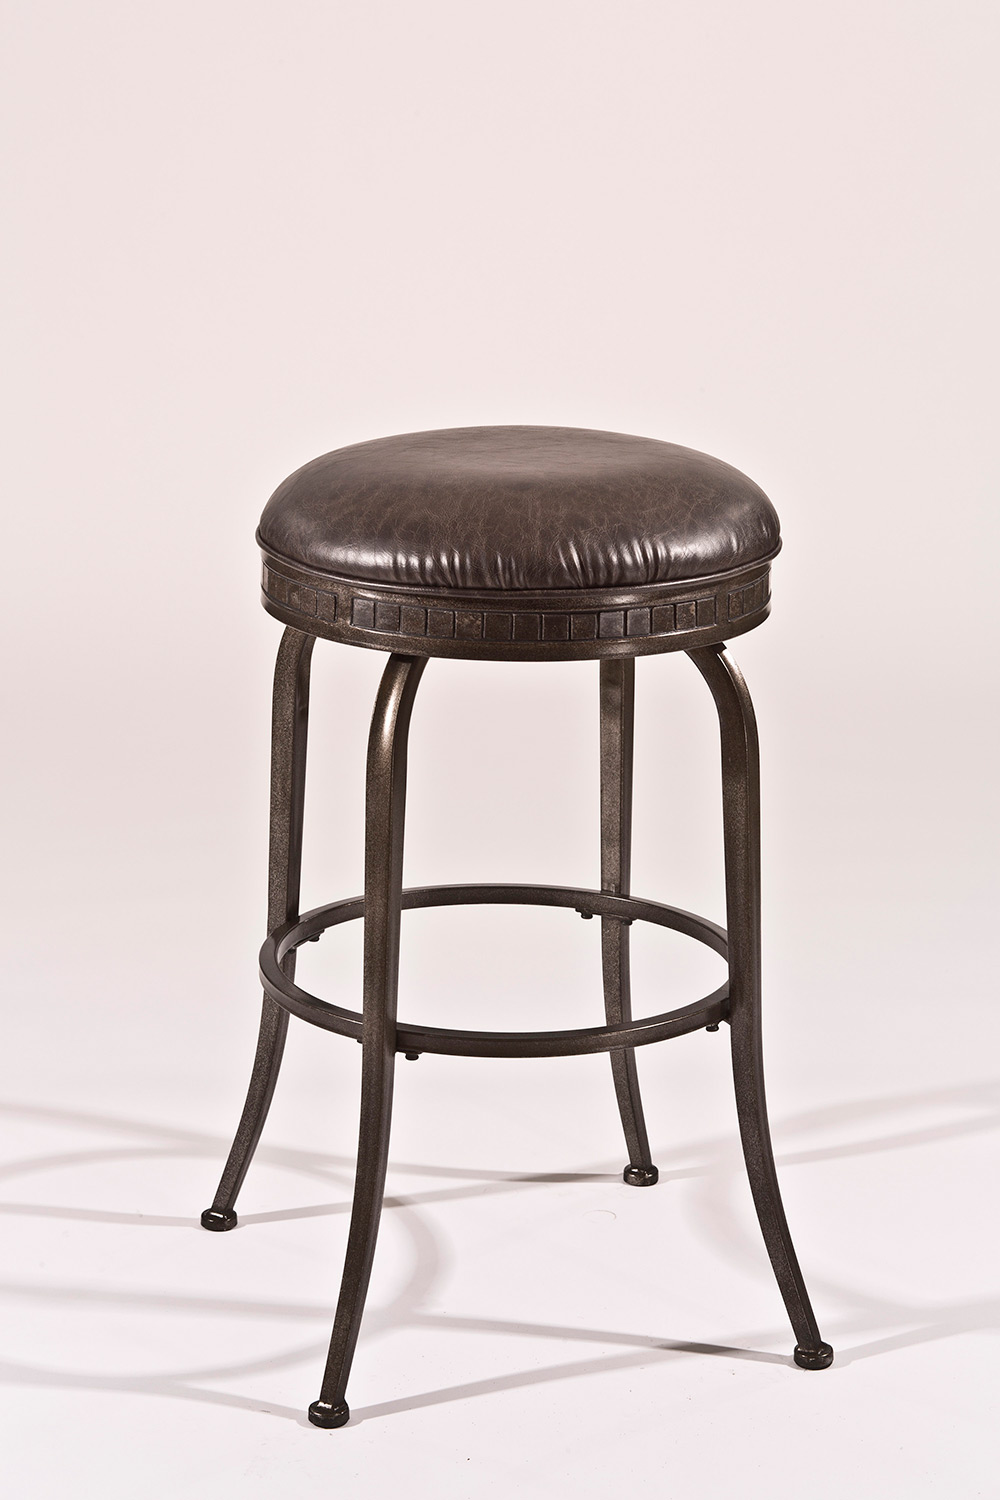 Hillsdale Harper Backless Swivel Counter Stool - Weathered Pewter - Charcoal Faux Leather